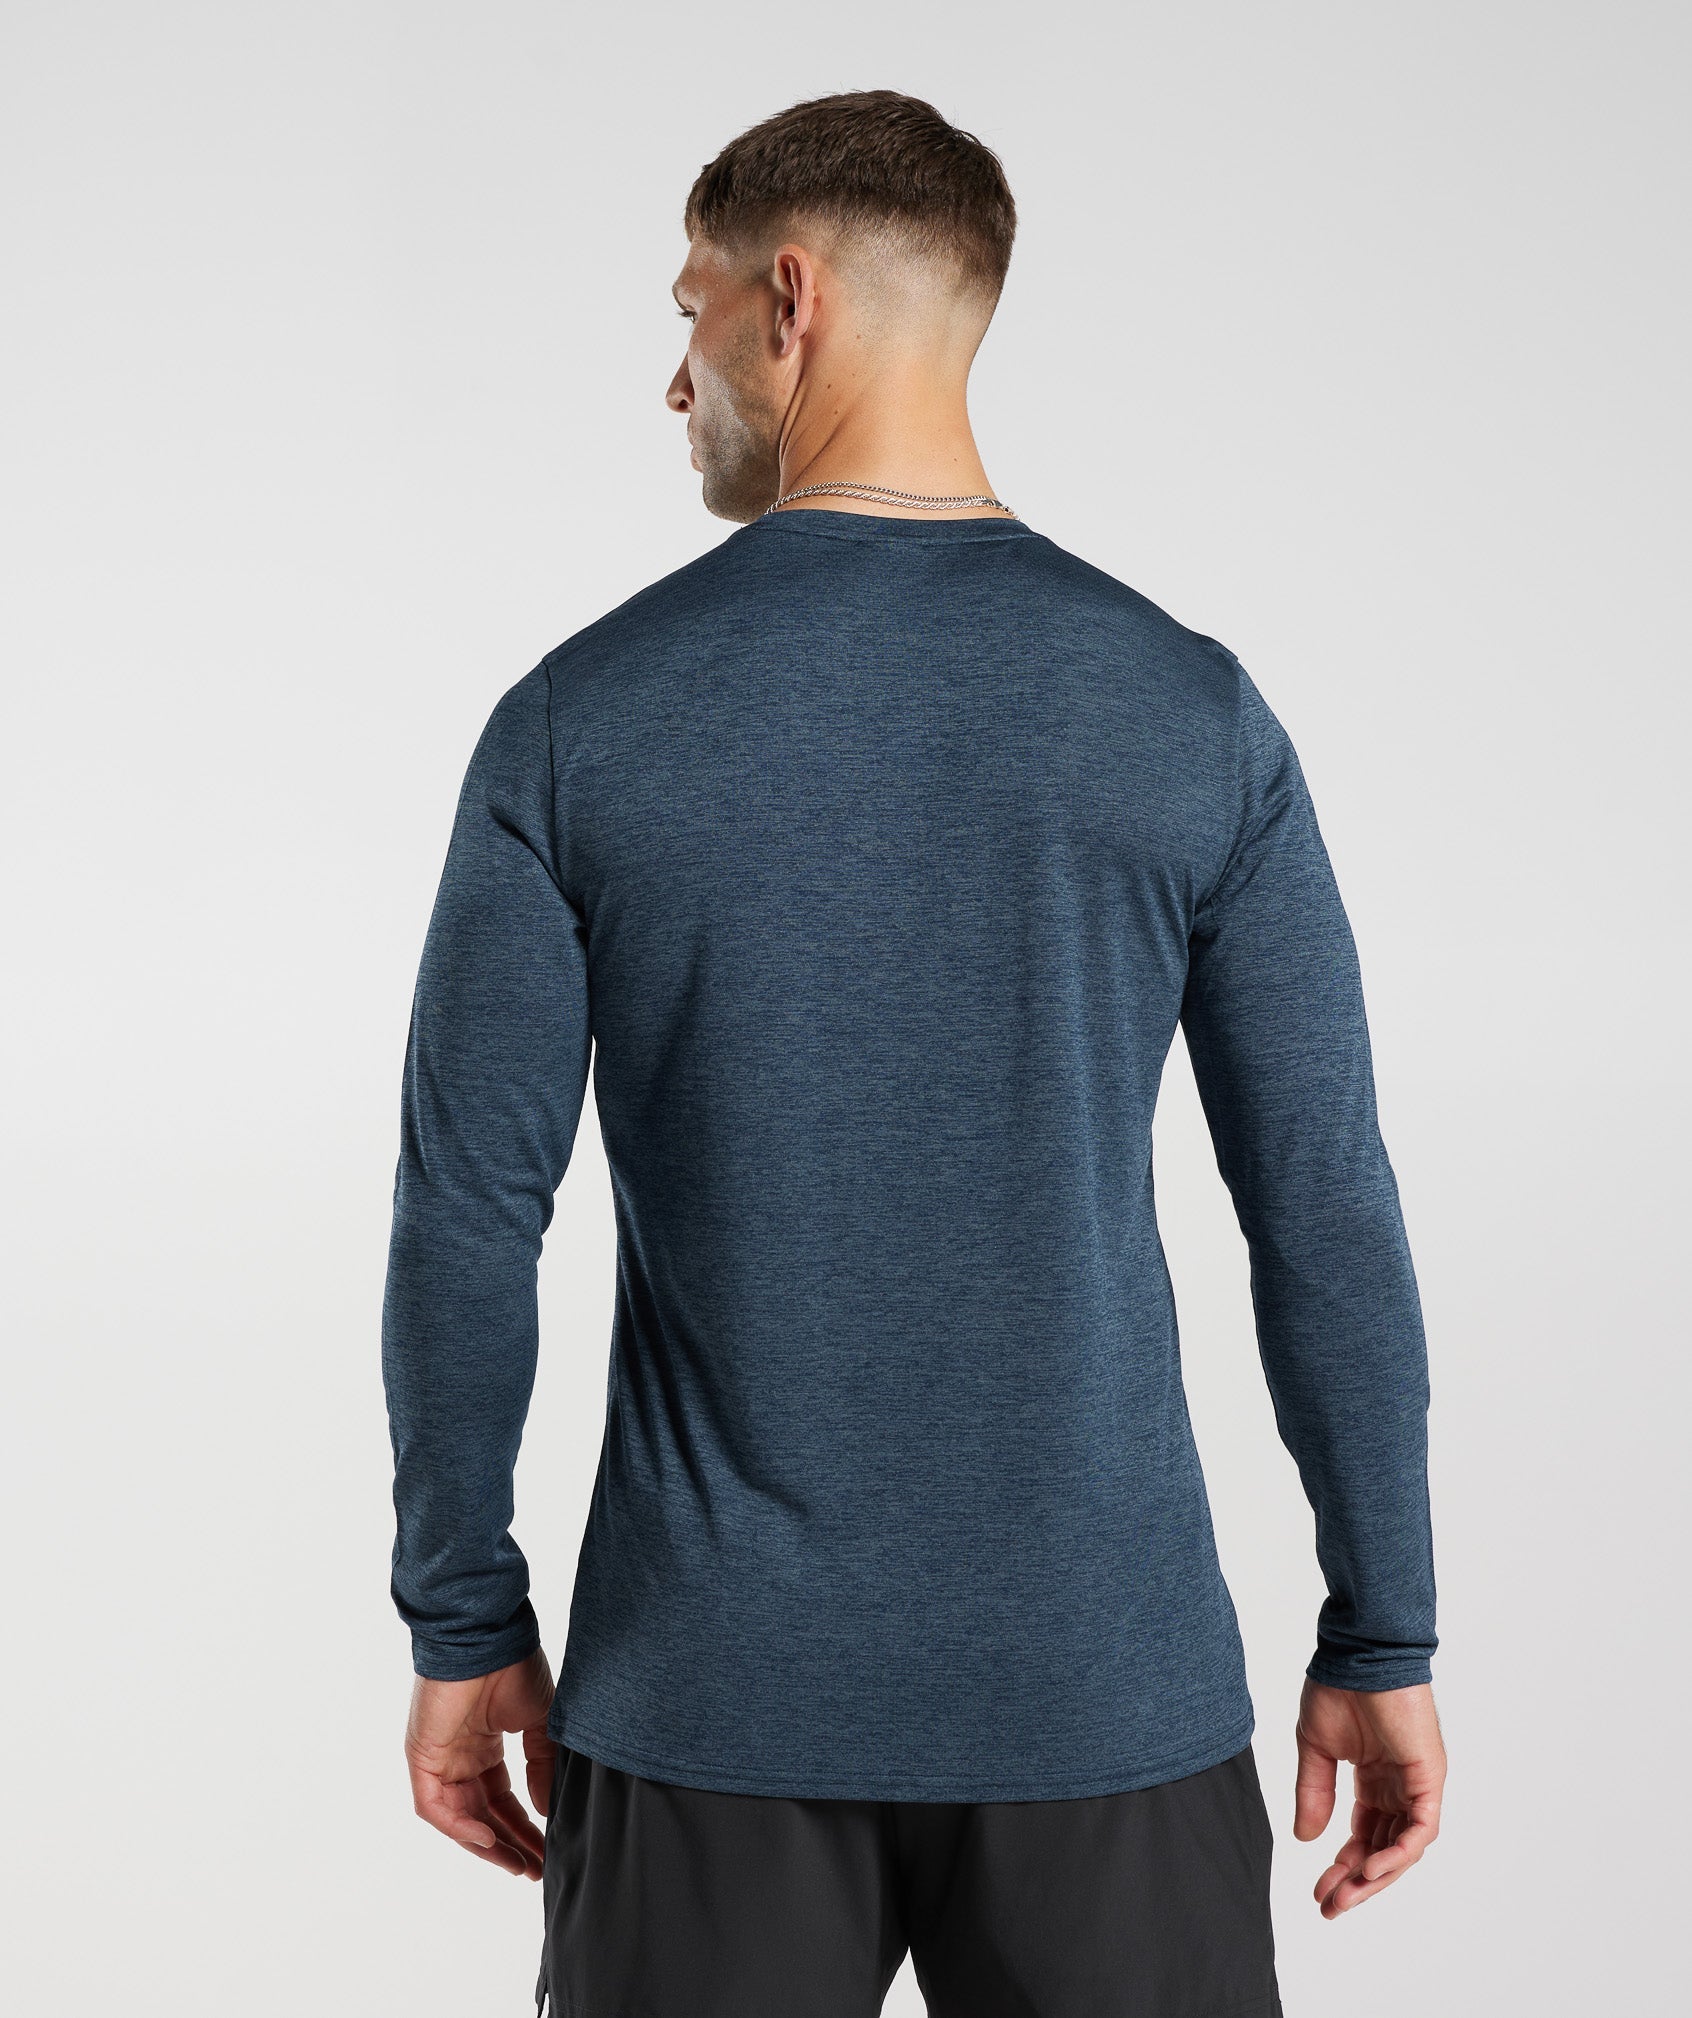 Arrival Marl Long Sleeve T-Shirt in Navy/Smokey Teal Marl - view 2